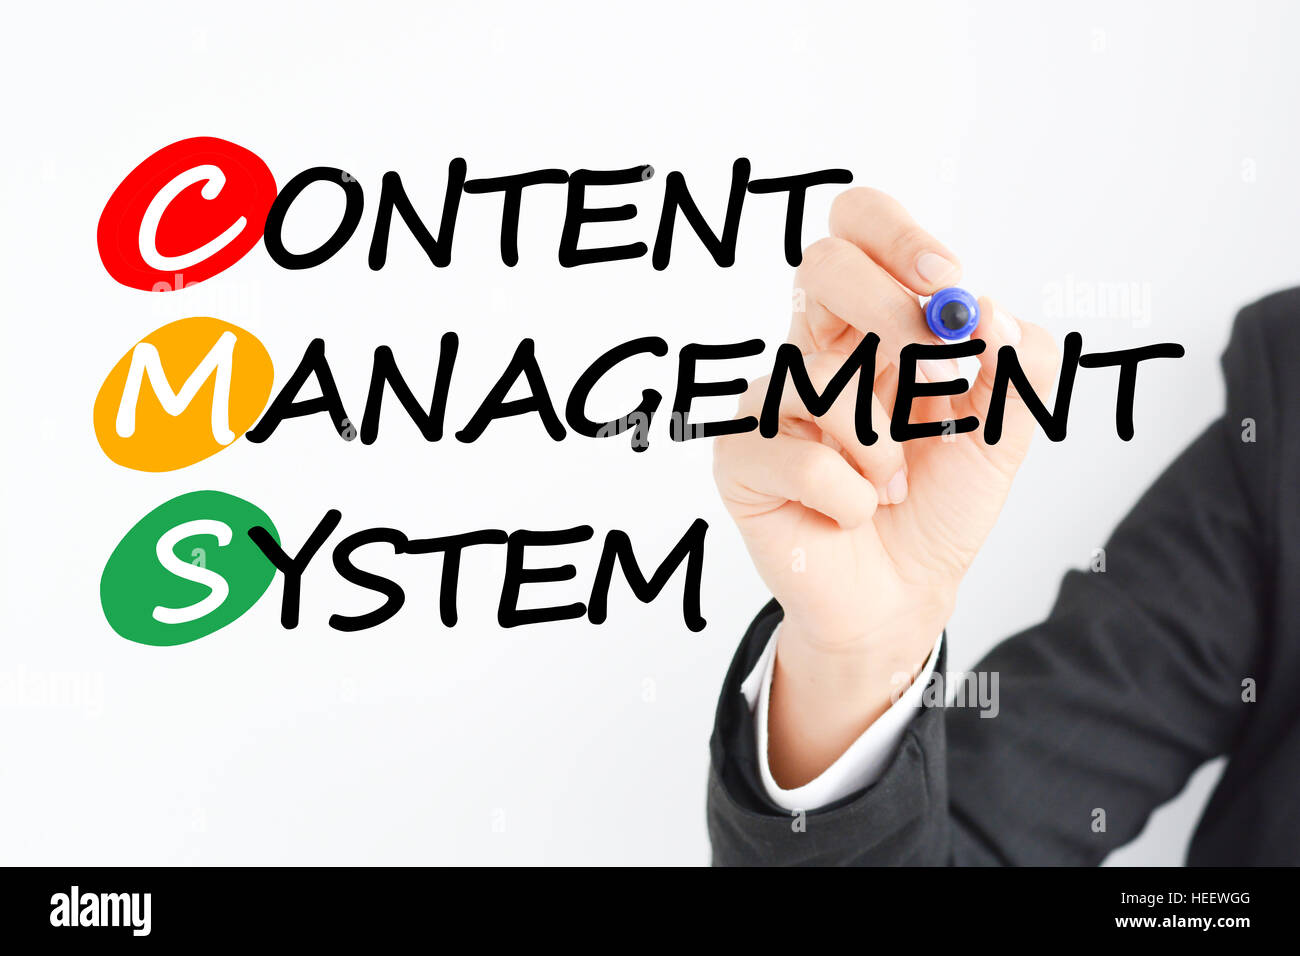 Content management system or CMS Stock Photo